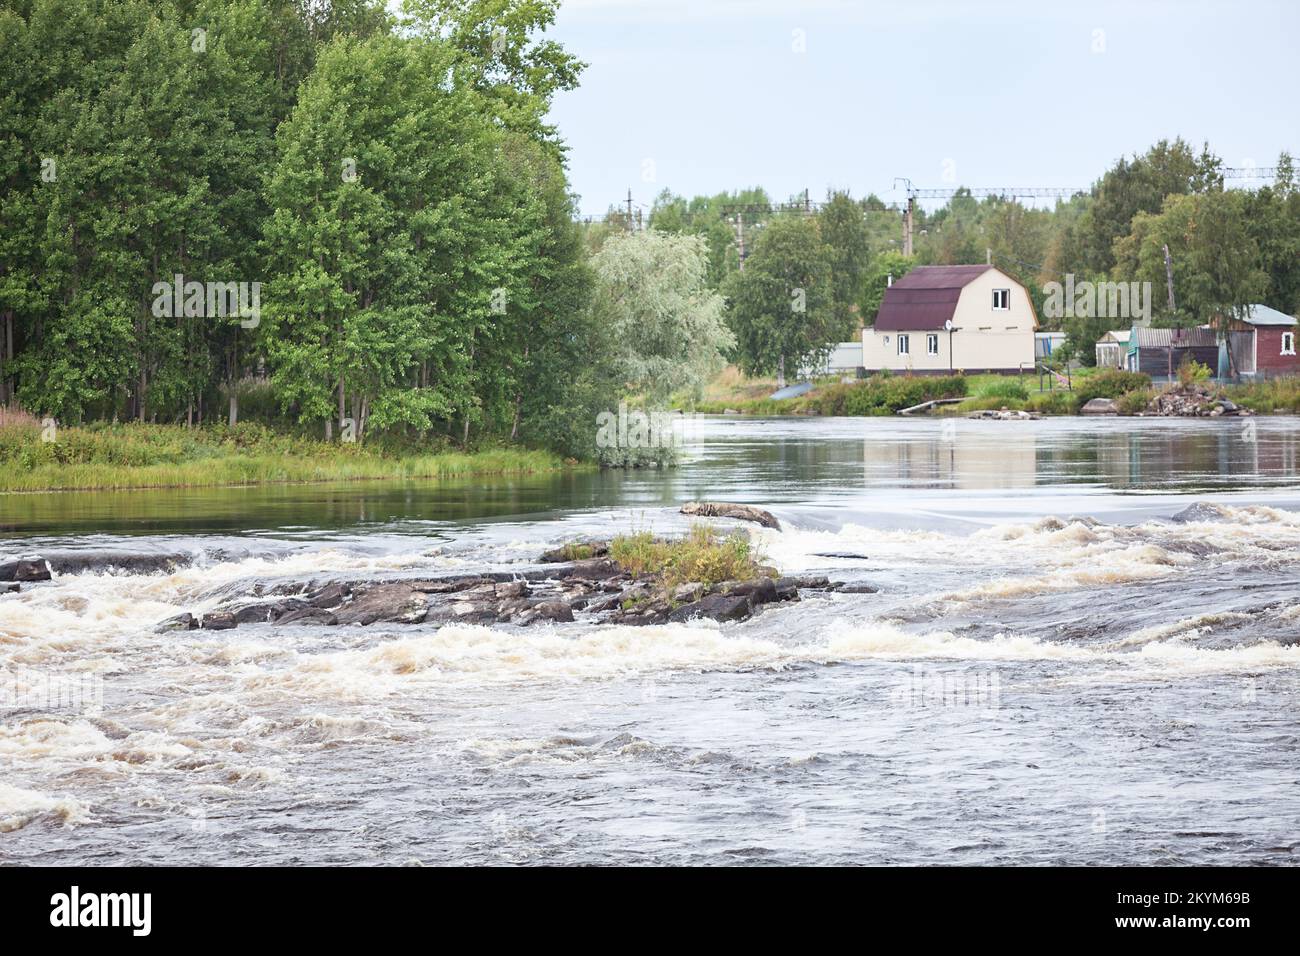 The Nizhny Vyg River flows among the rocky banks. Town of Belomorsk, Karelia, northern Russia Stock Photo